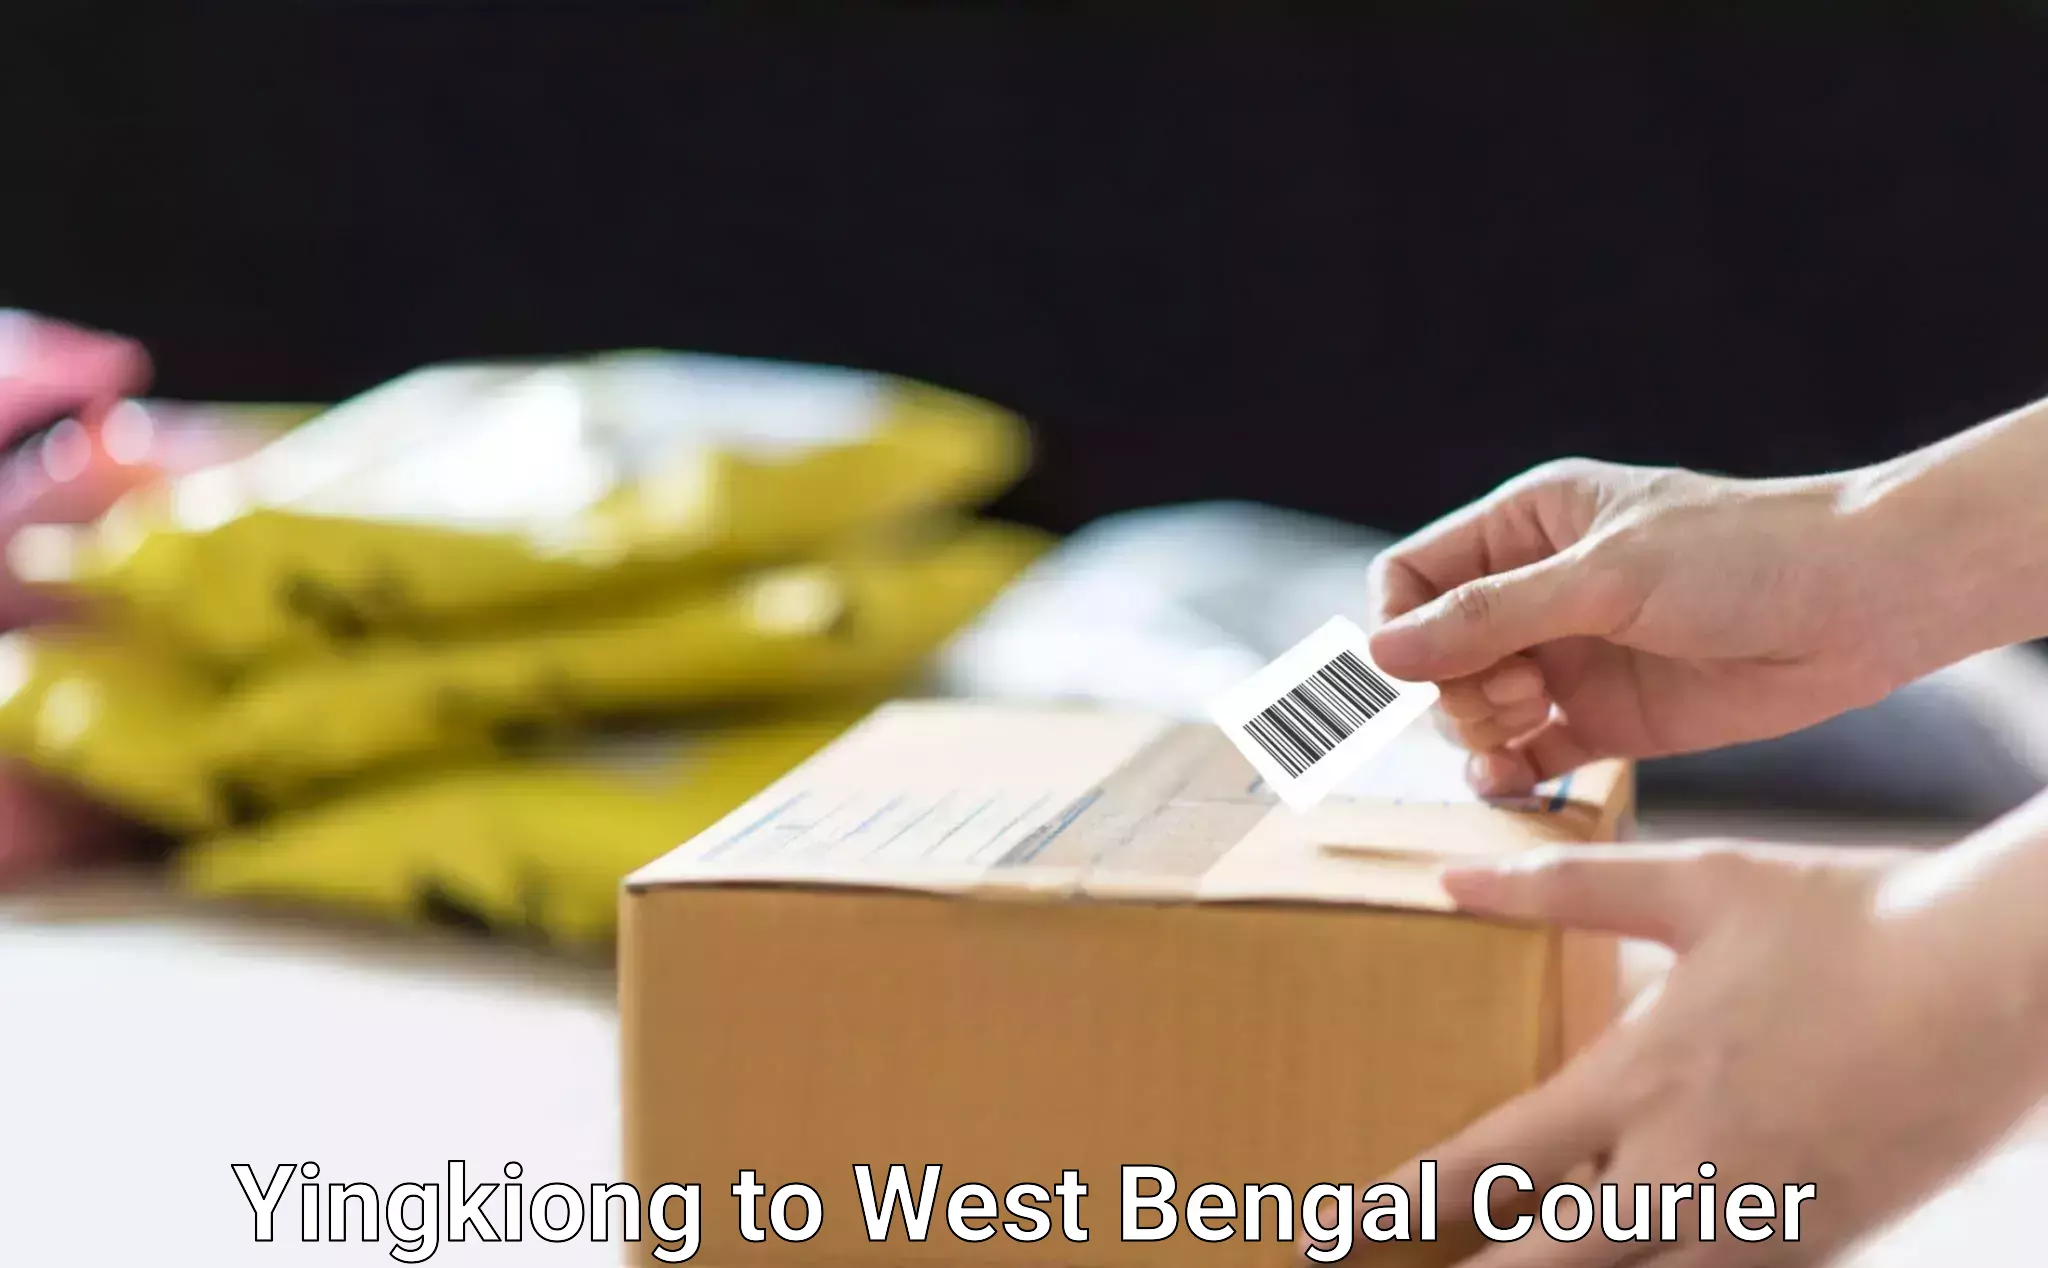 Secure freight services Yingkiong to West Bengal